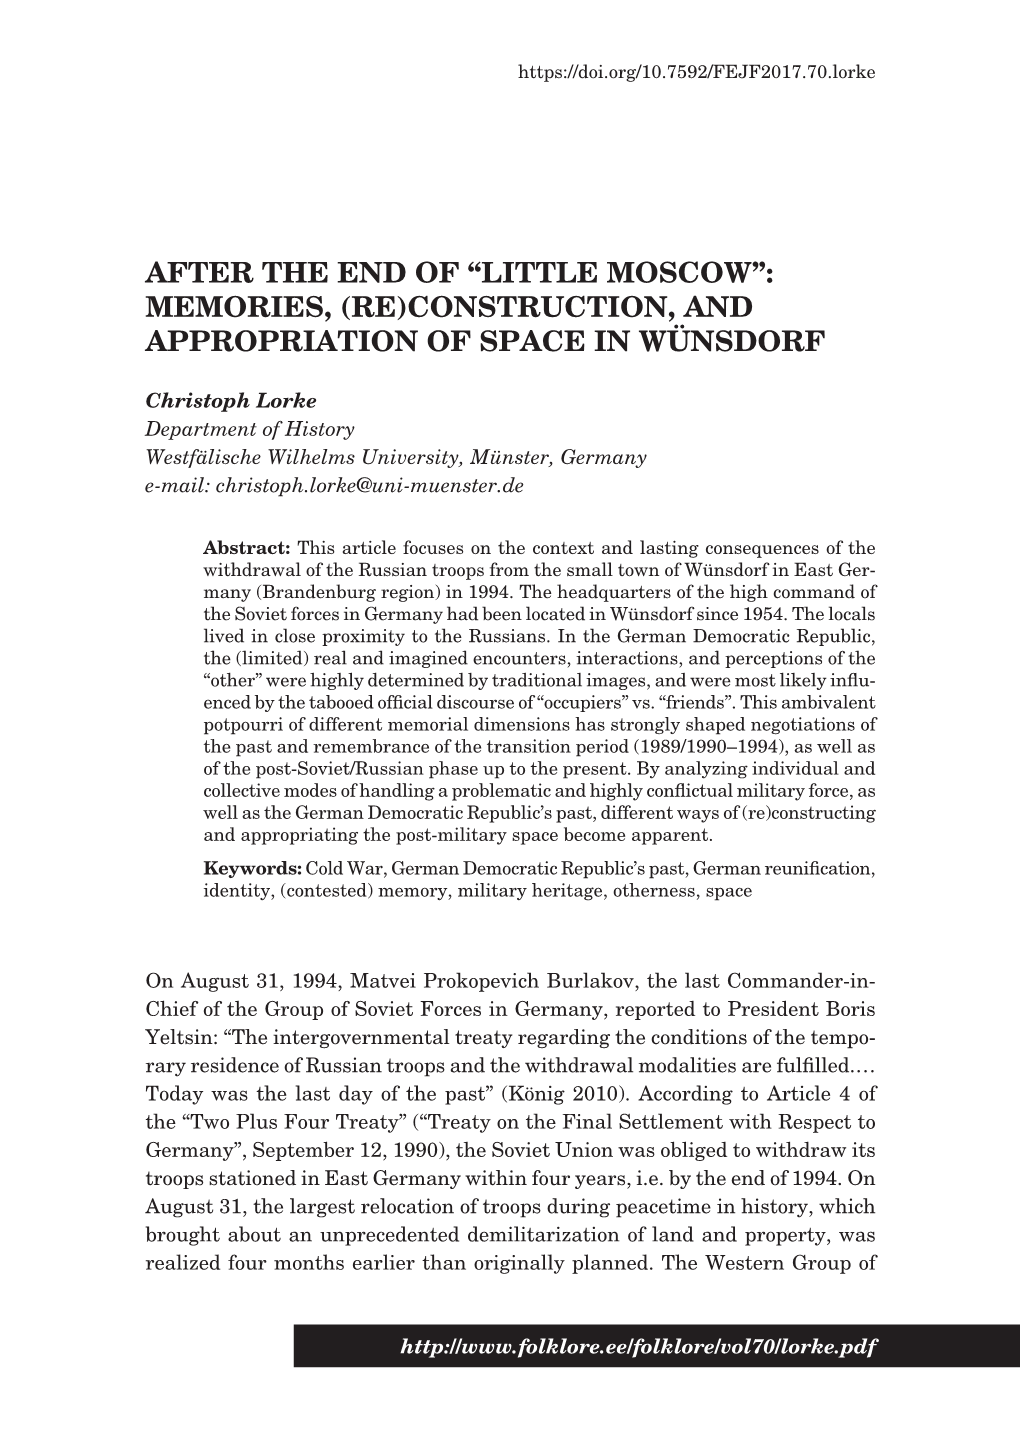 Little Moscow”: Memories, (Re)Construction, and Appropriation of Space in Wünsdorf